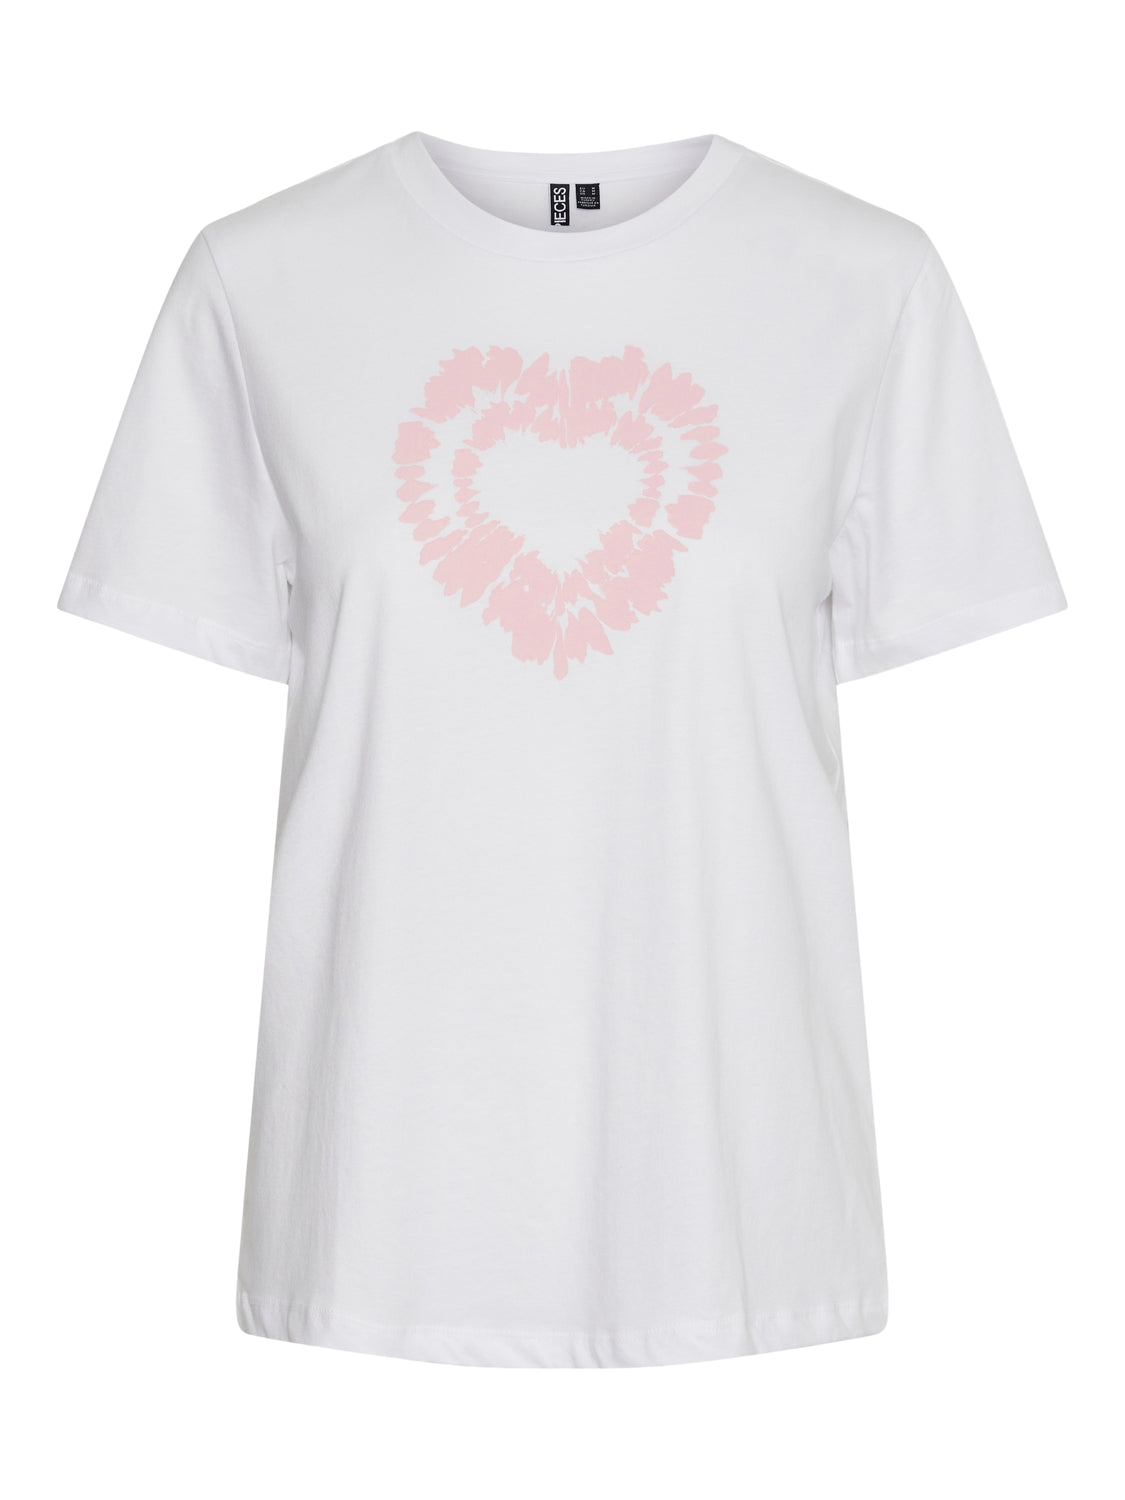 Pieces t-shirt bianco con stampa cuore rosa